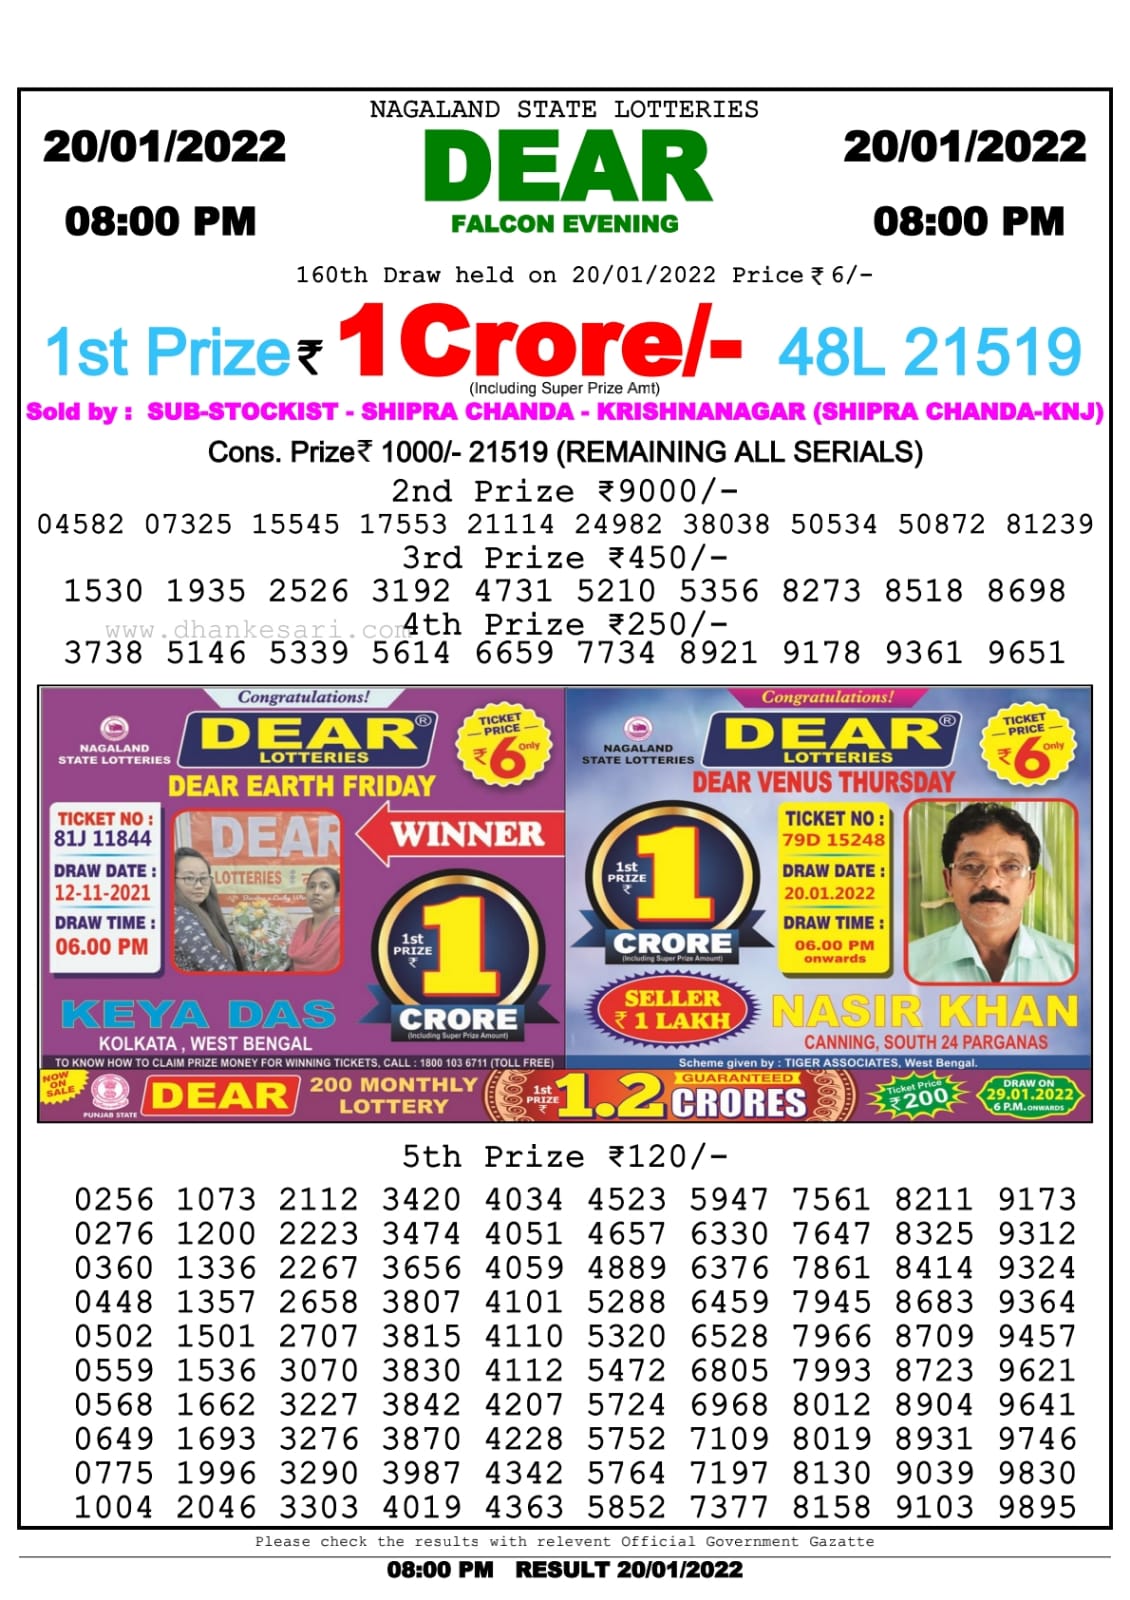 Dear Lottery Nagaland state Lottery Results 8.00 PM 20.01.2022